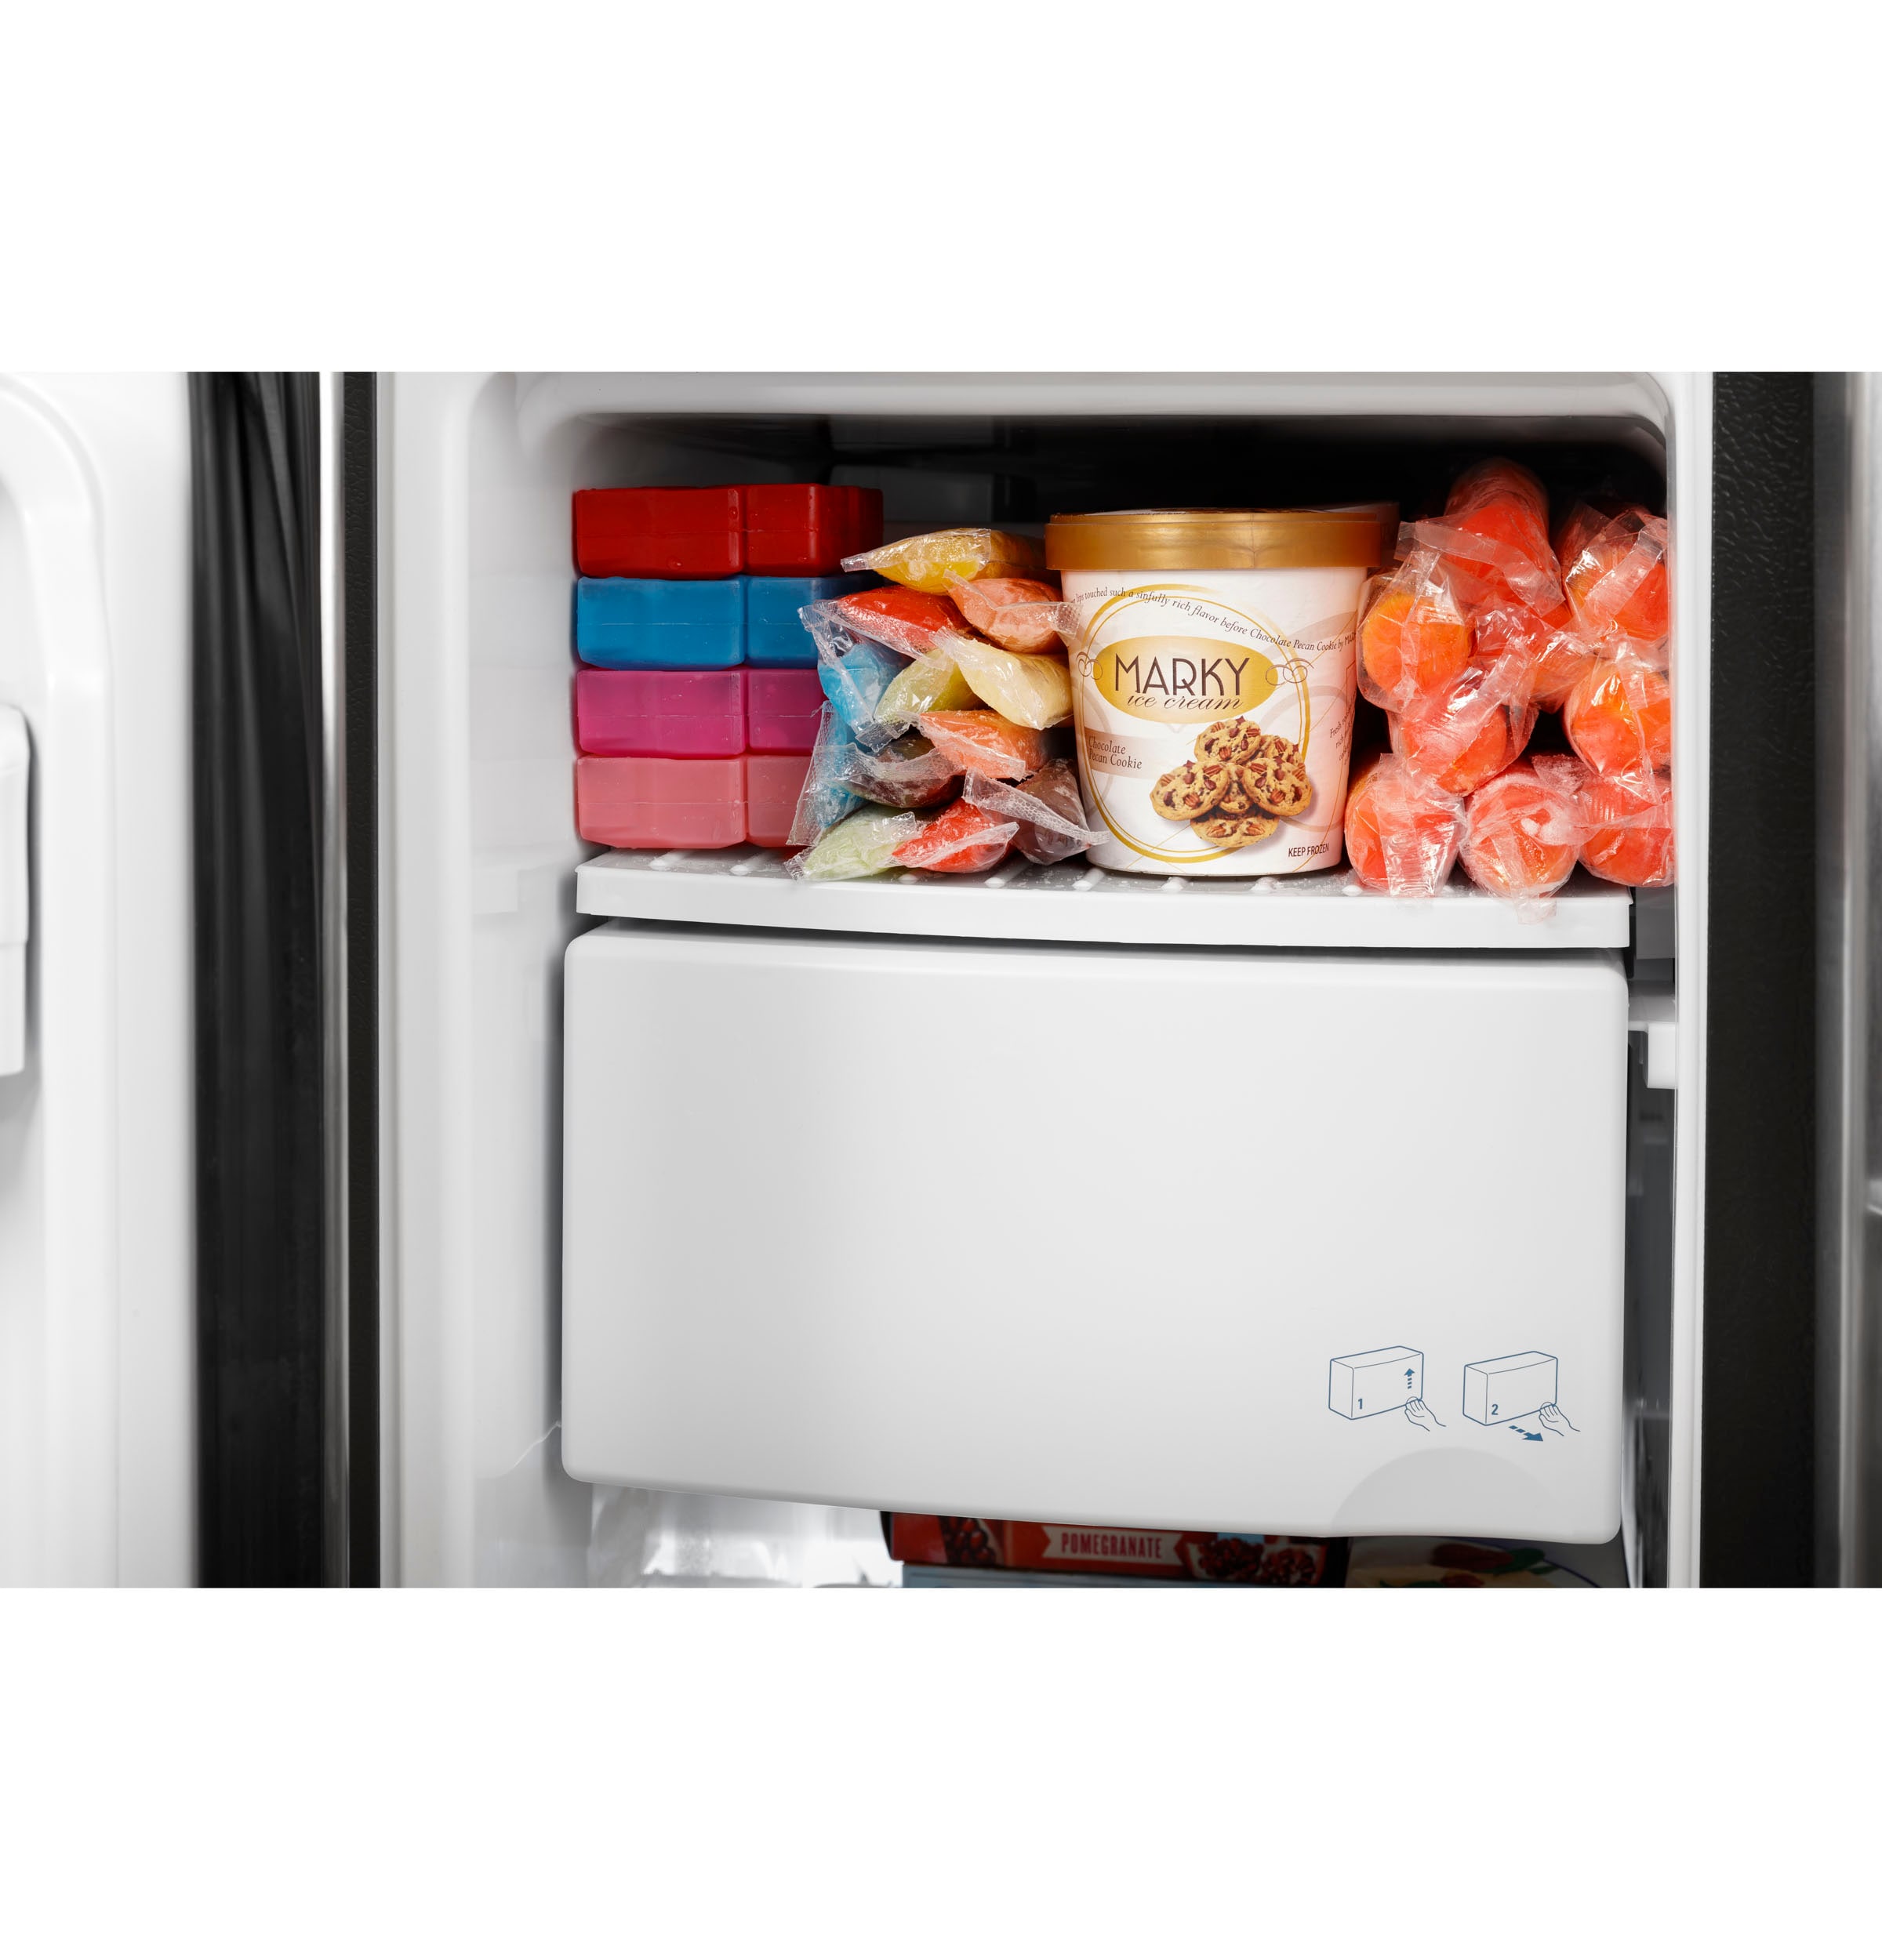 PZS22MYKFS in Fingerprint Resistant Stainless by GE Appliances in Bangor,  ME - GE Profile™ Series 21.9 Cu. Ft. Counter-Depth Side-By-Side Refrigerator